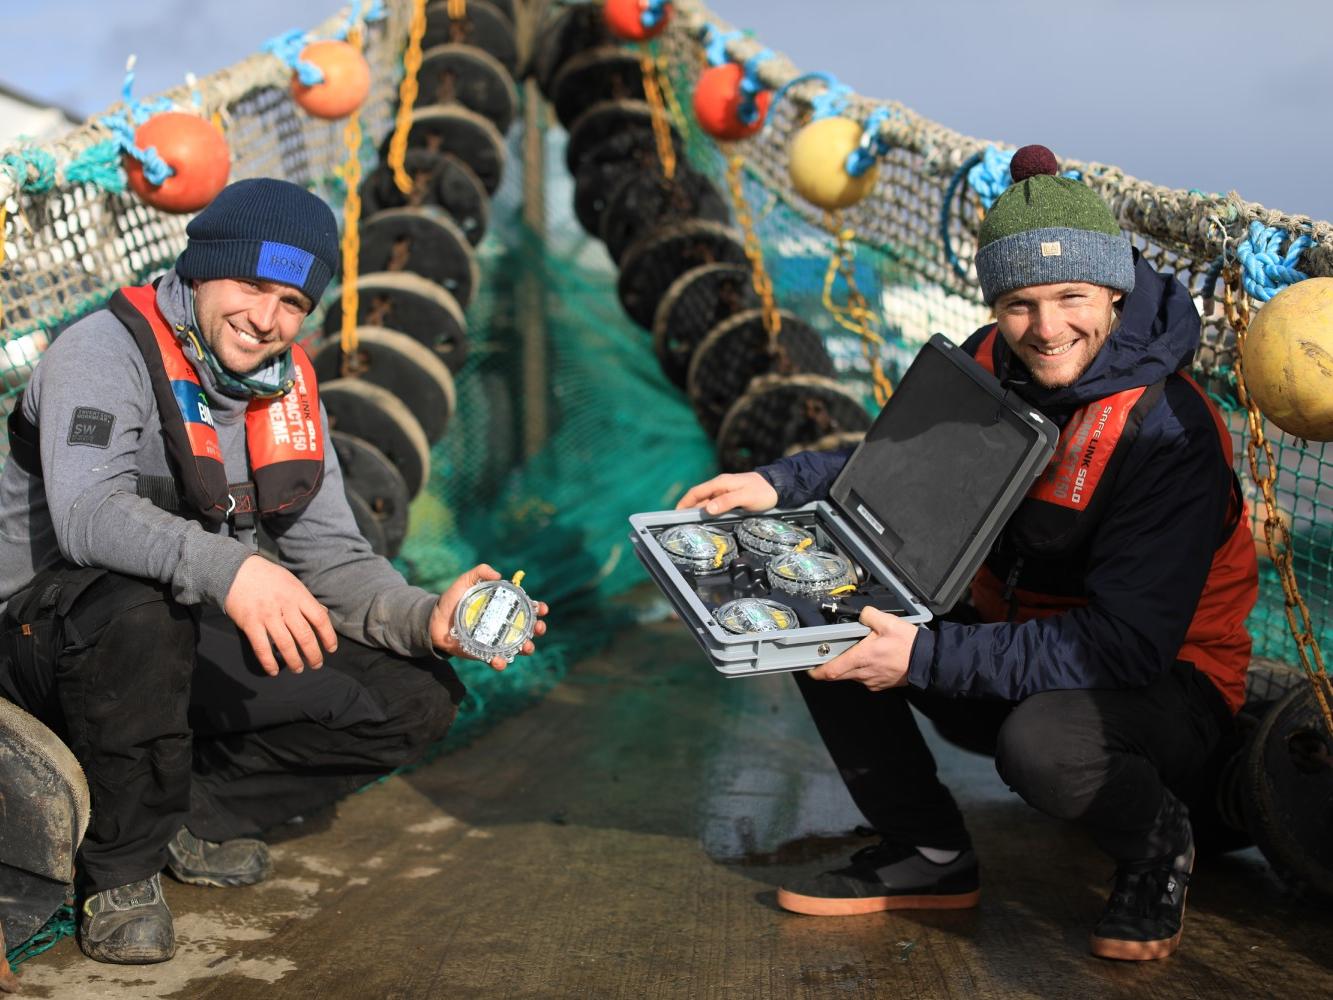 Intertronics supports rapid development of sustainable fishing device